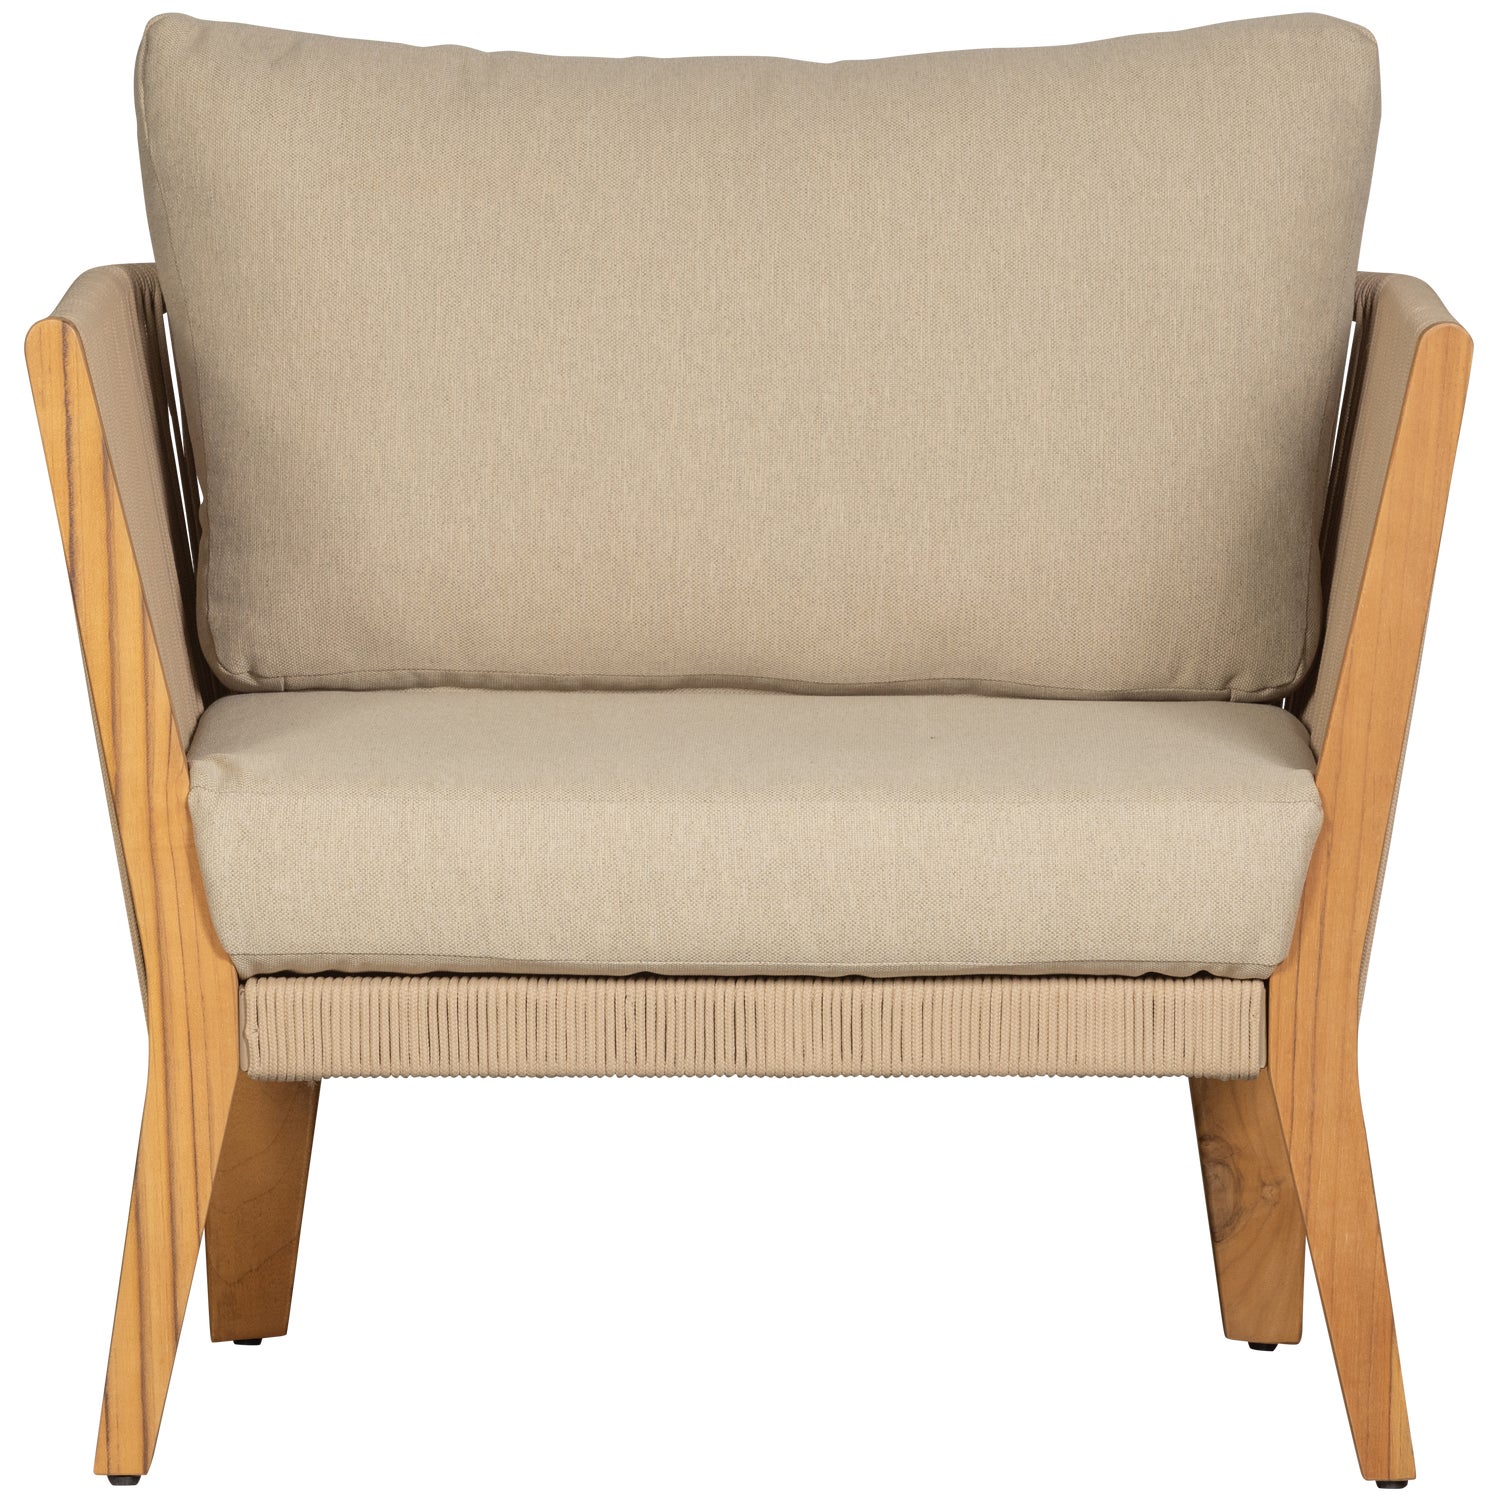 BH428LCS-01_VS_EXT_San_Remo_fauteuil_teak_zand.png?auto=webp&format=png&width=1500&height=1500